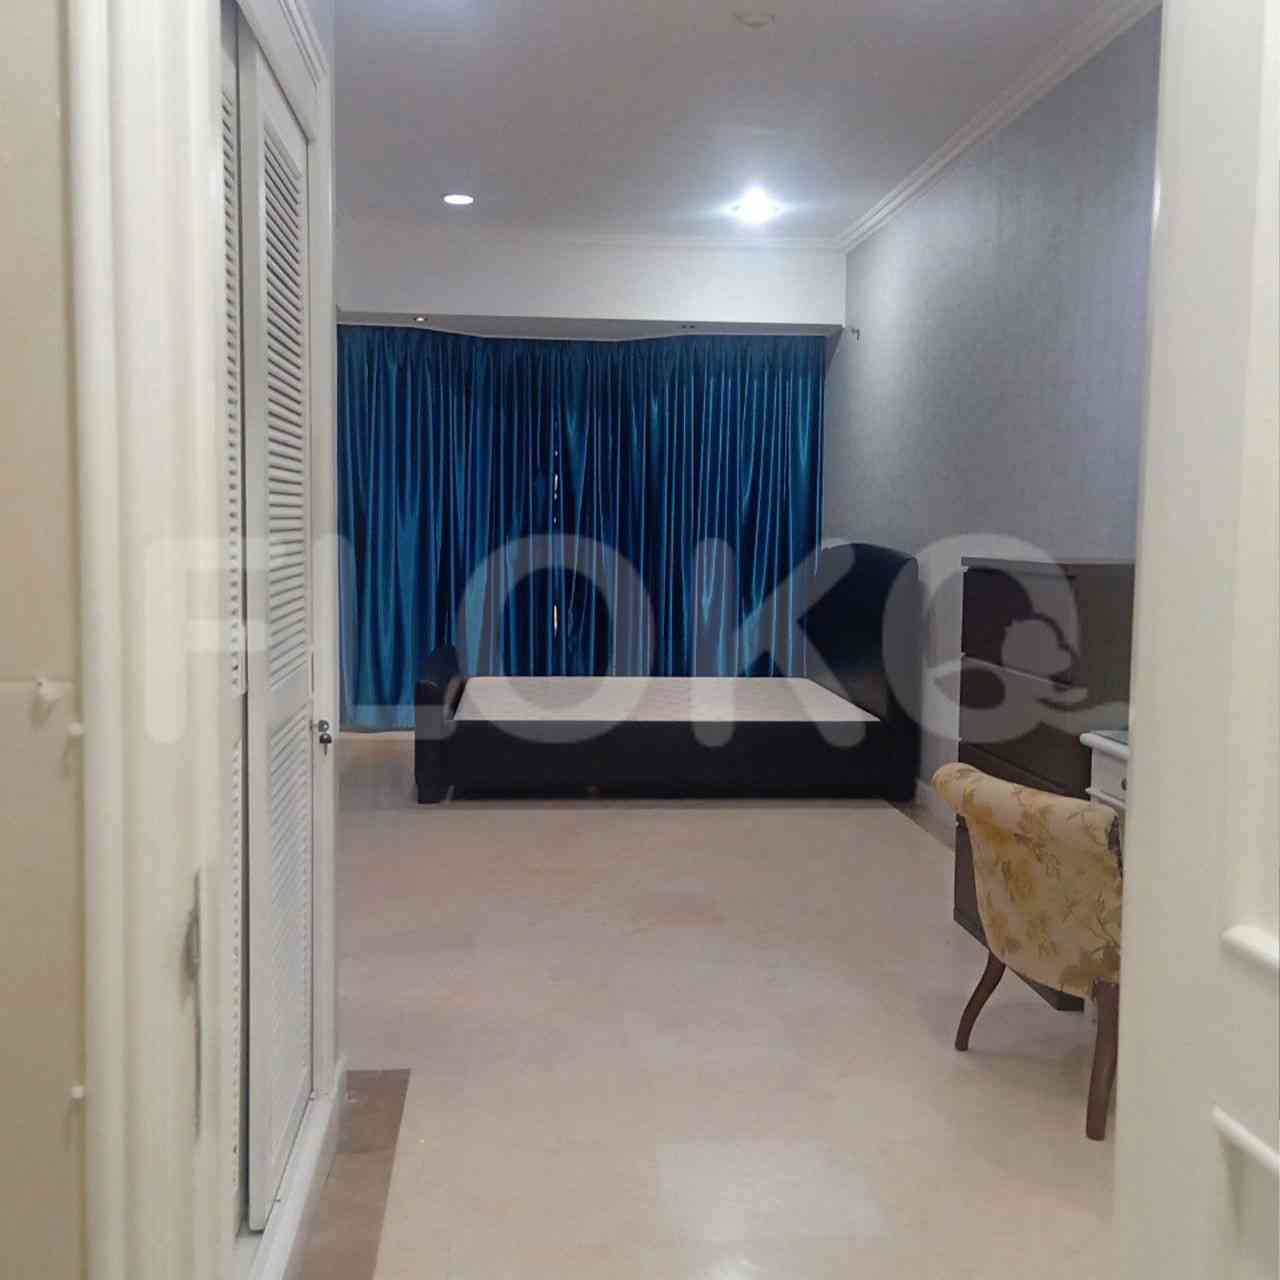 3 Bedroom on 15th Floor for Rent in Casablanca Apartment - ftebd9 1